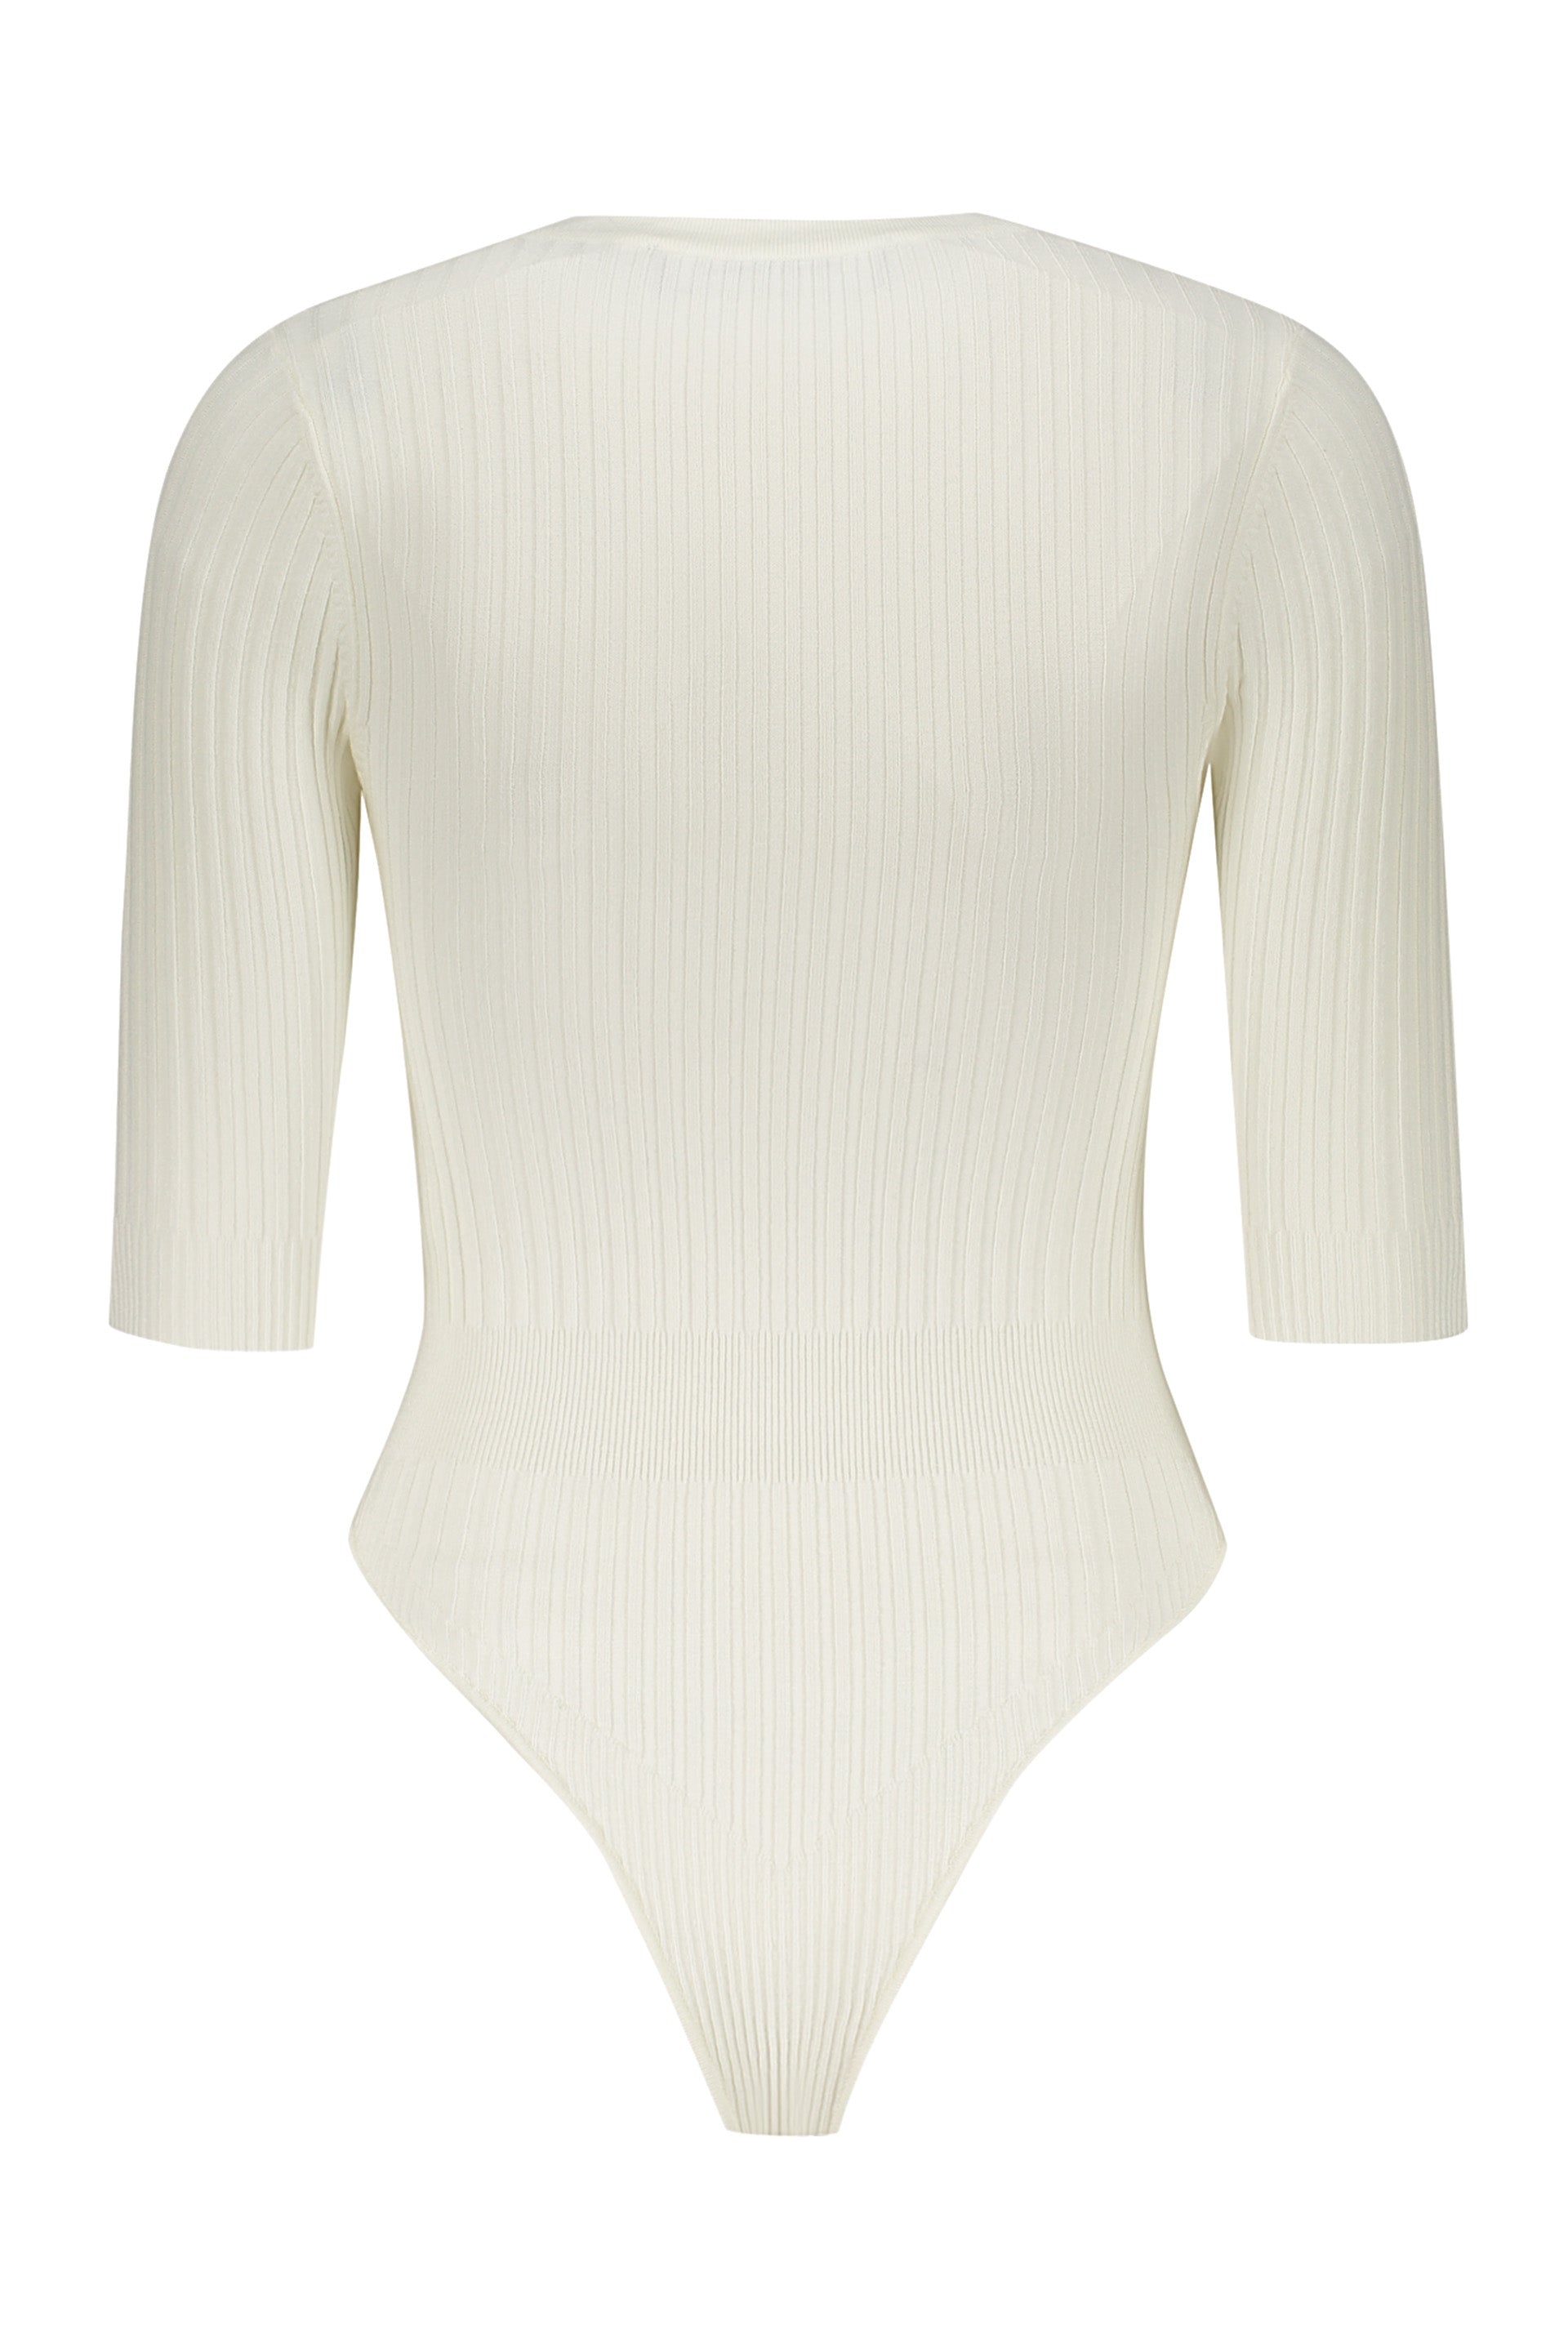 ANDREADAMO-OUTLET-SALE-Ribbed-knit-bodysuit-Shirts-S-ARCHIVE-COLLECTION-2.jpg